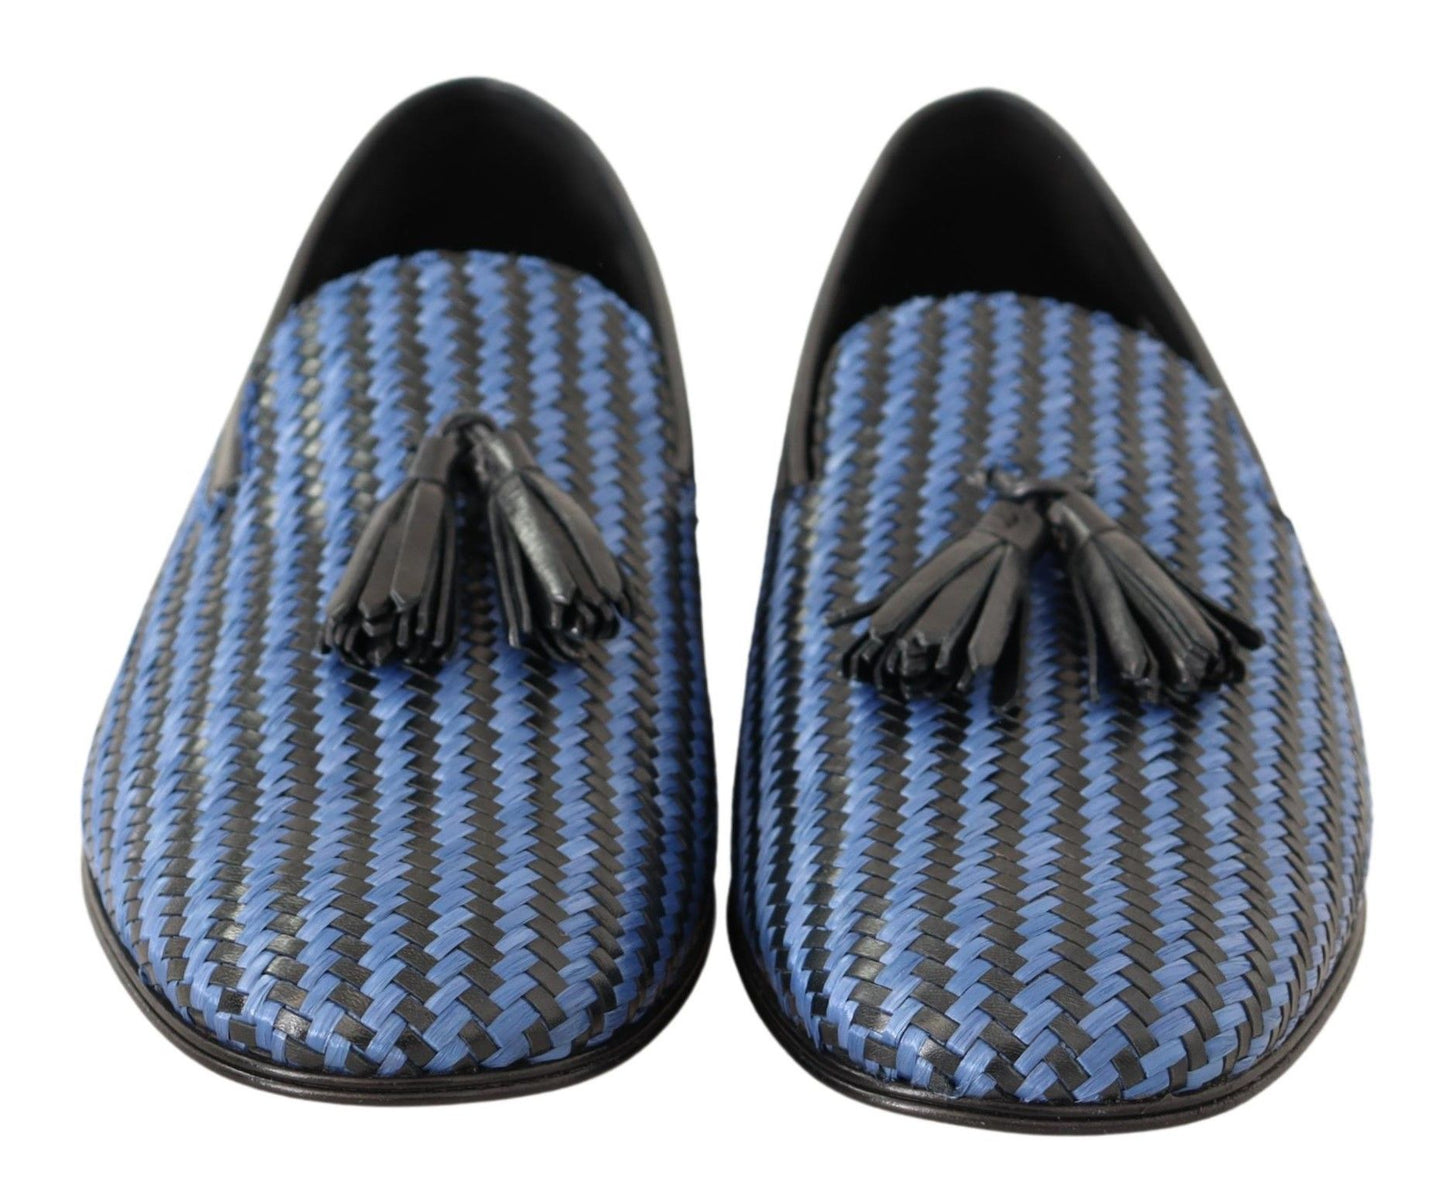 Blue Woven Leather Tassel Loafers Shoes